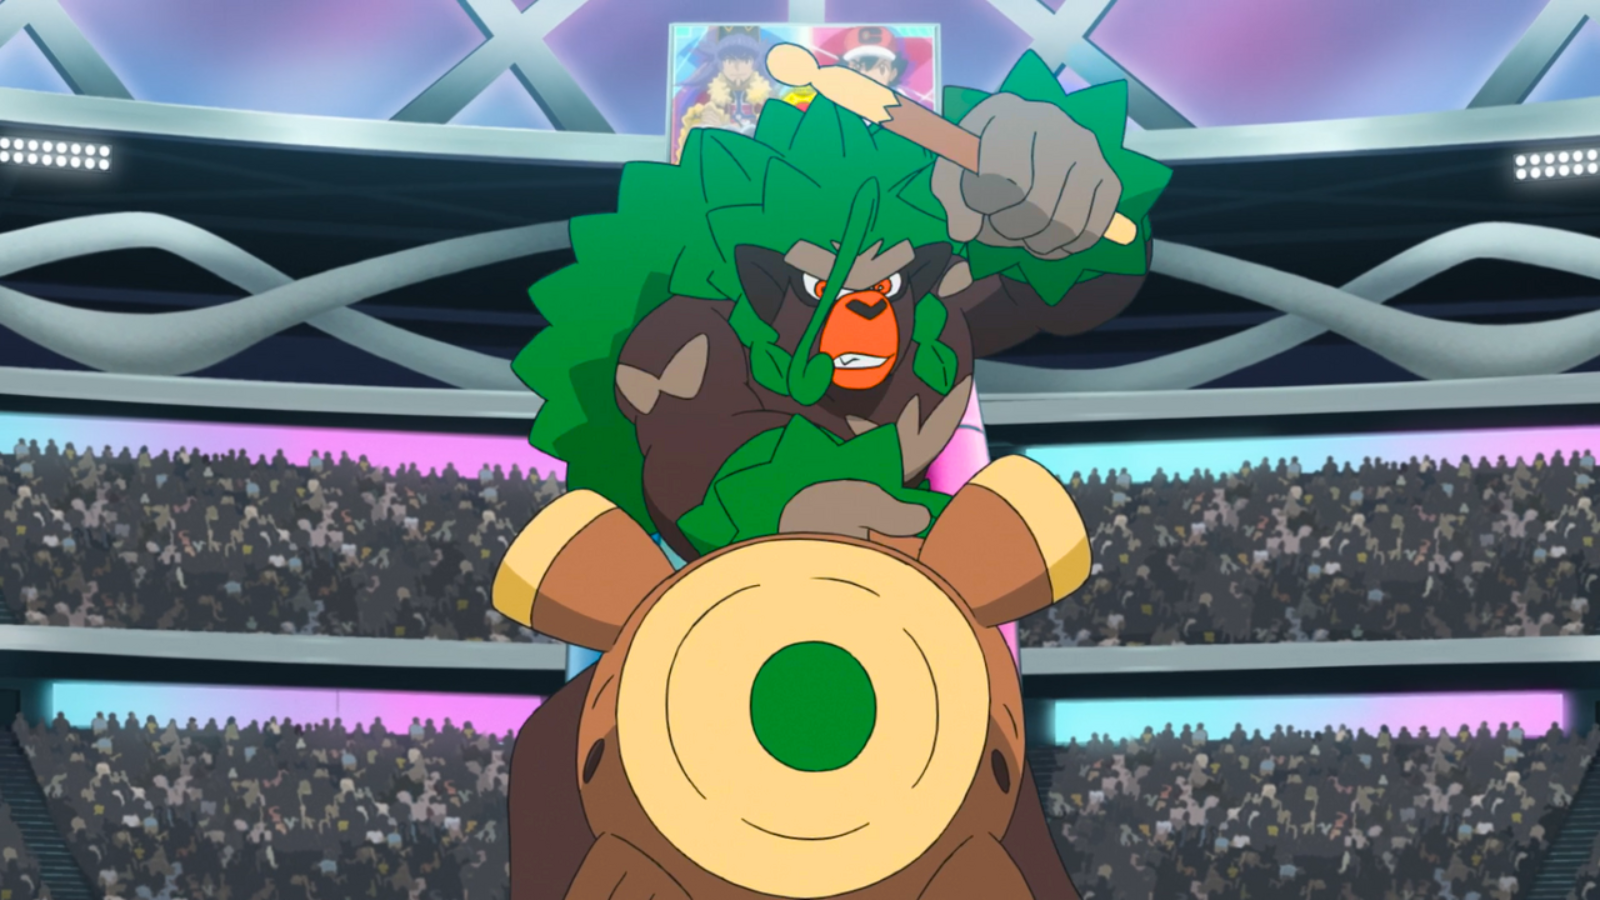 Rillaboom playing the drums in a stadium in the Pokémon anime.